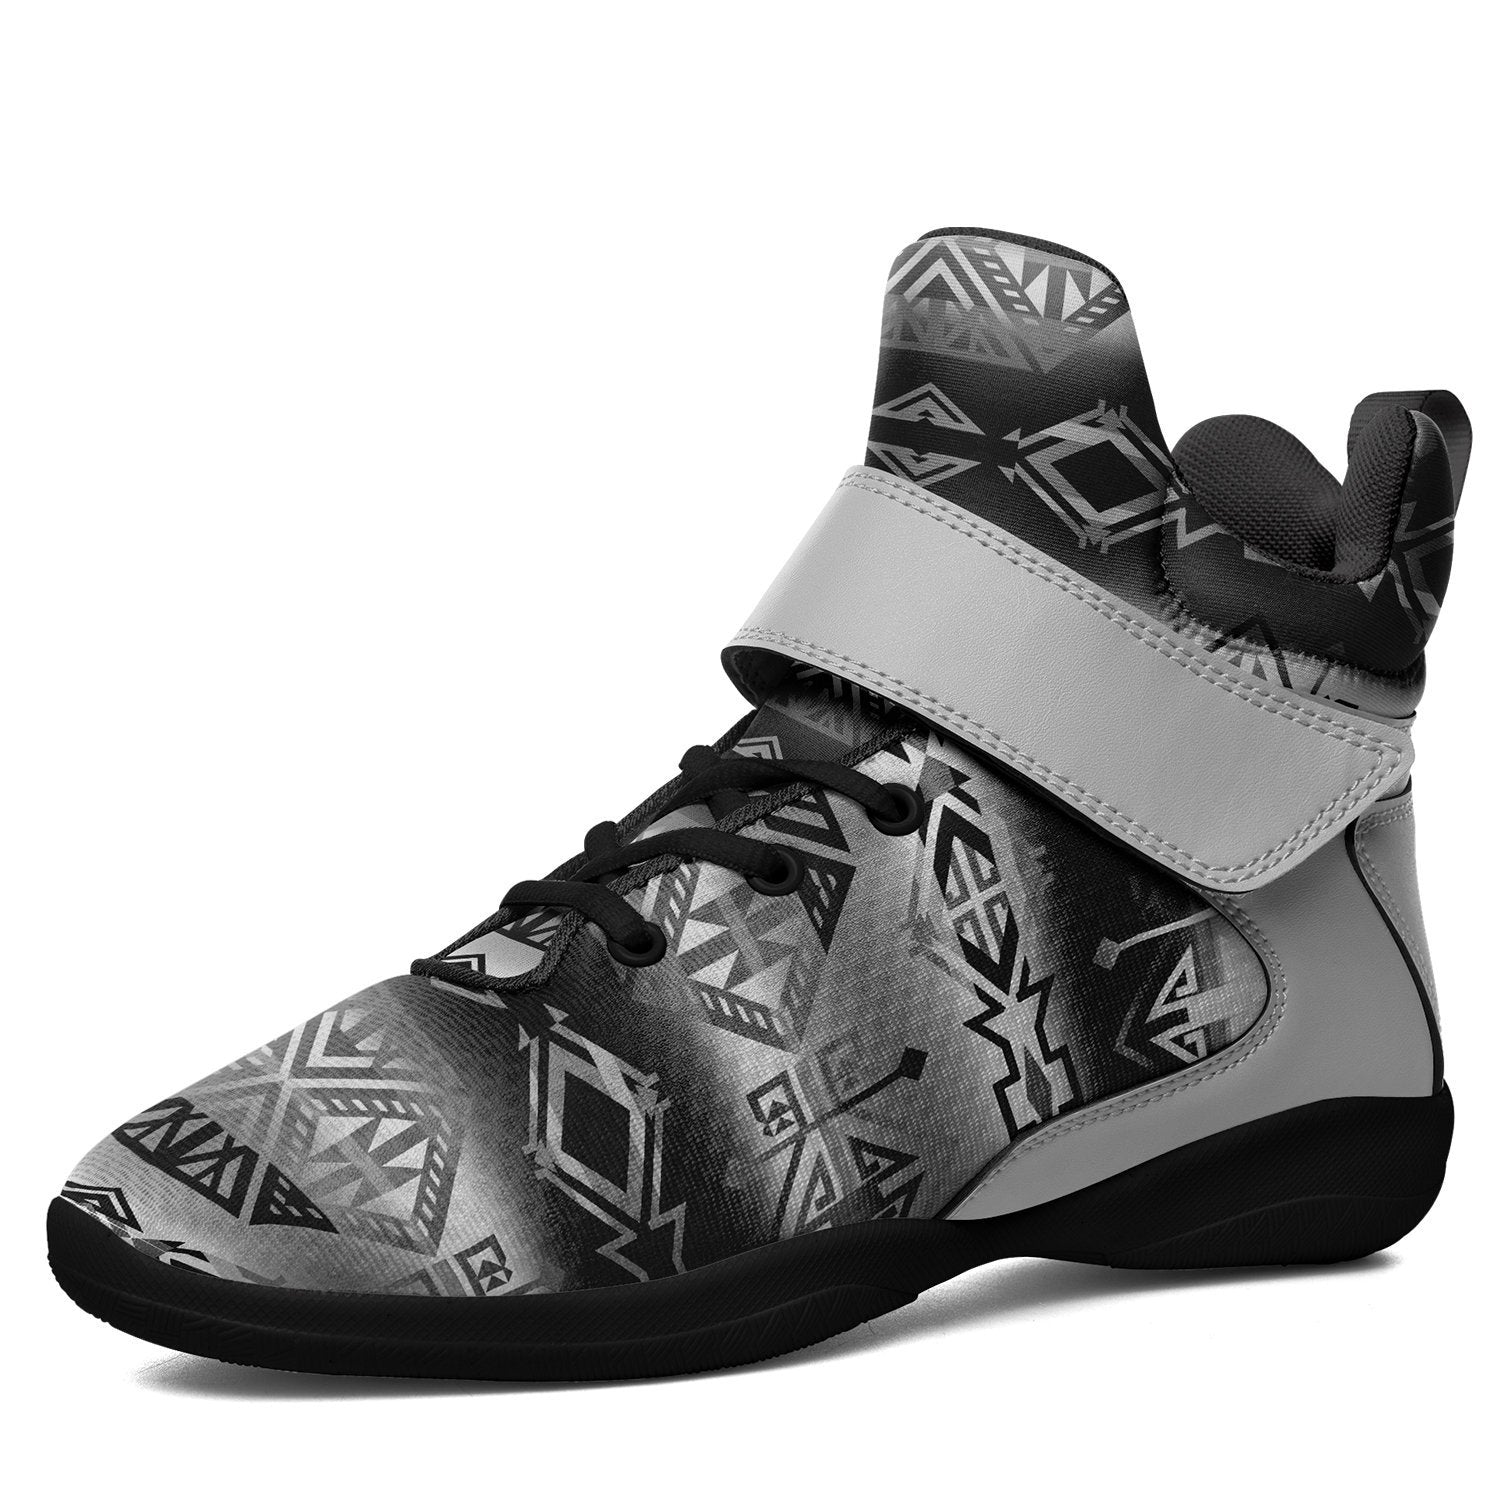 Trade Route Cave Kid's Ipottaa Basketball / Sport High Top Shoes 49 Dzine US Women 4.5 / US Youth 3.5 / EUR 35 Black Sole with Gray Strap 